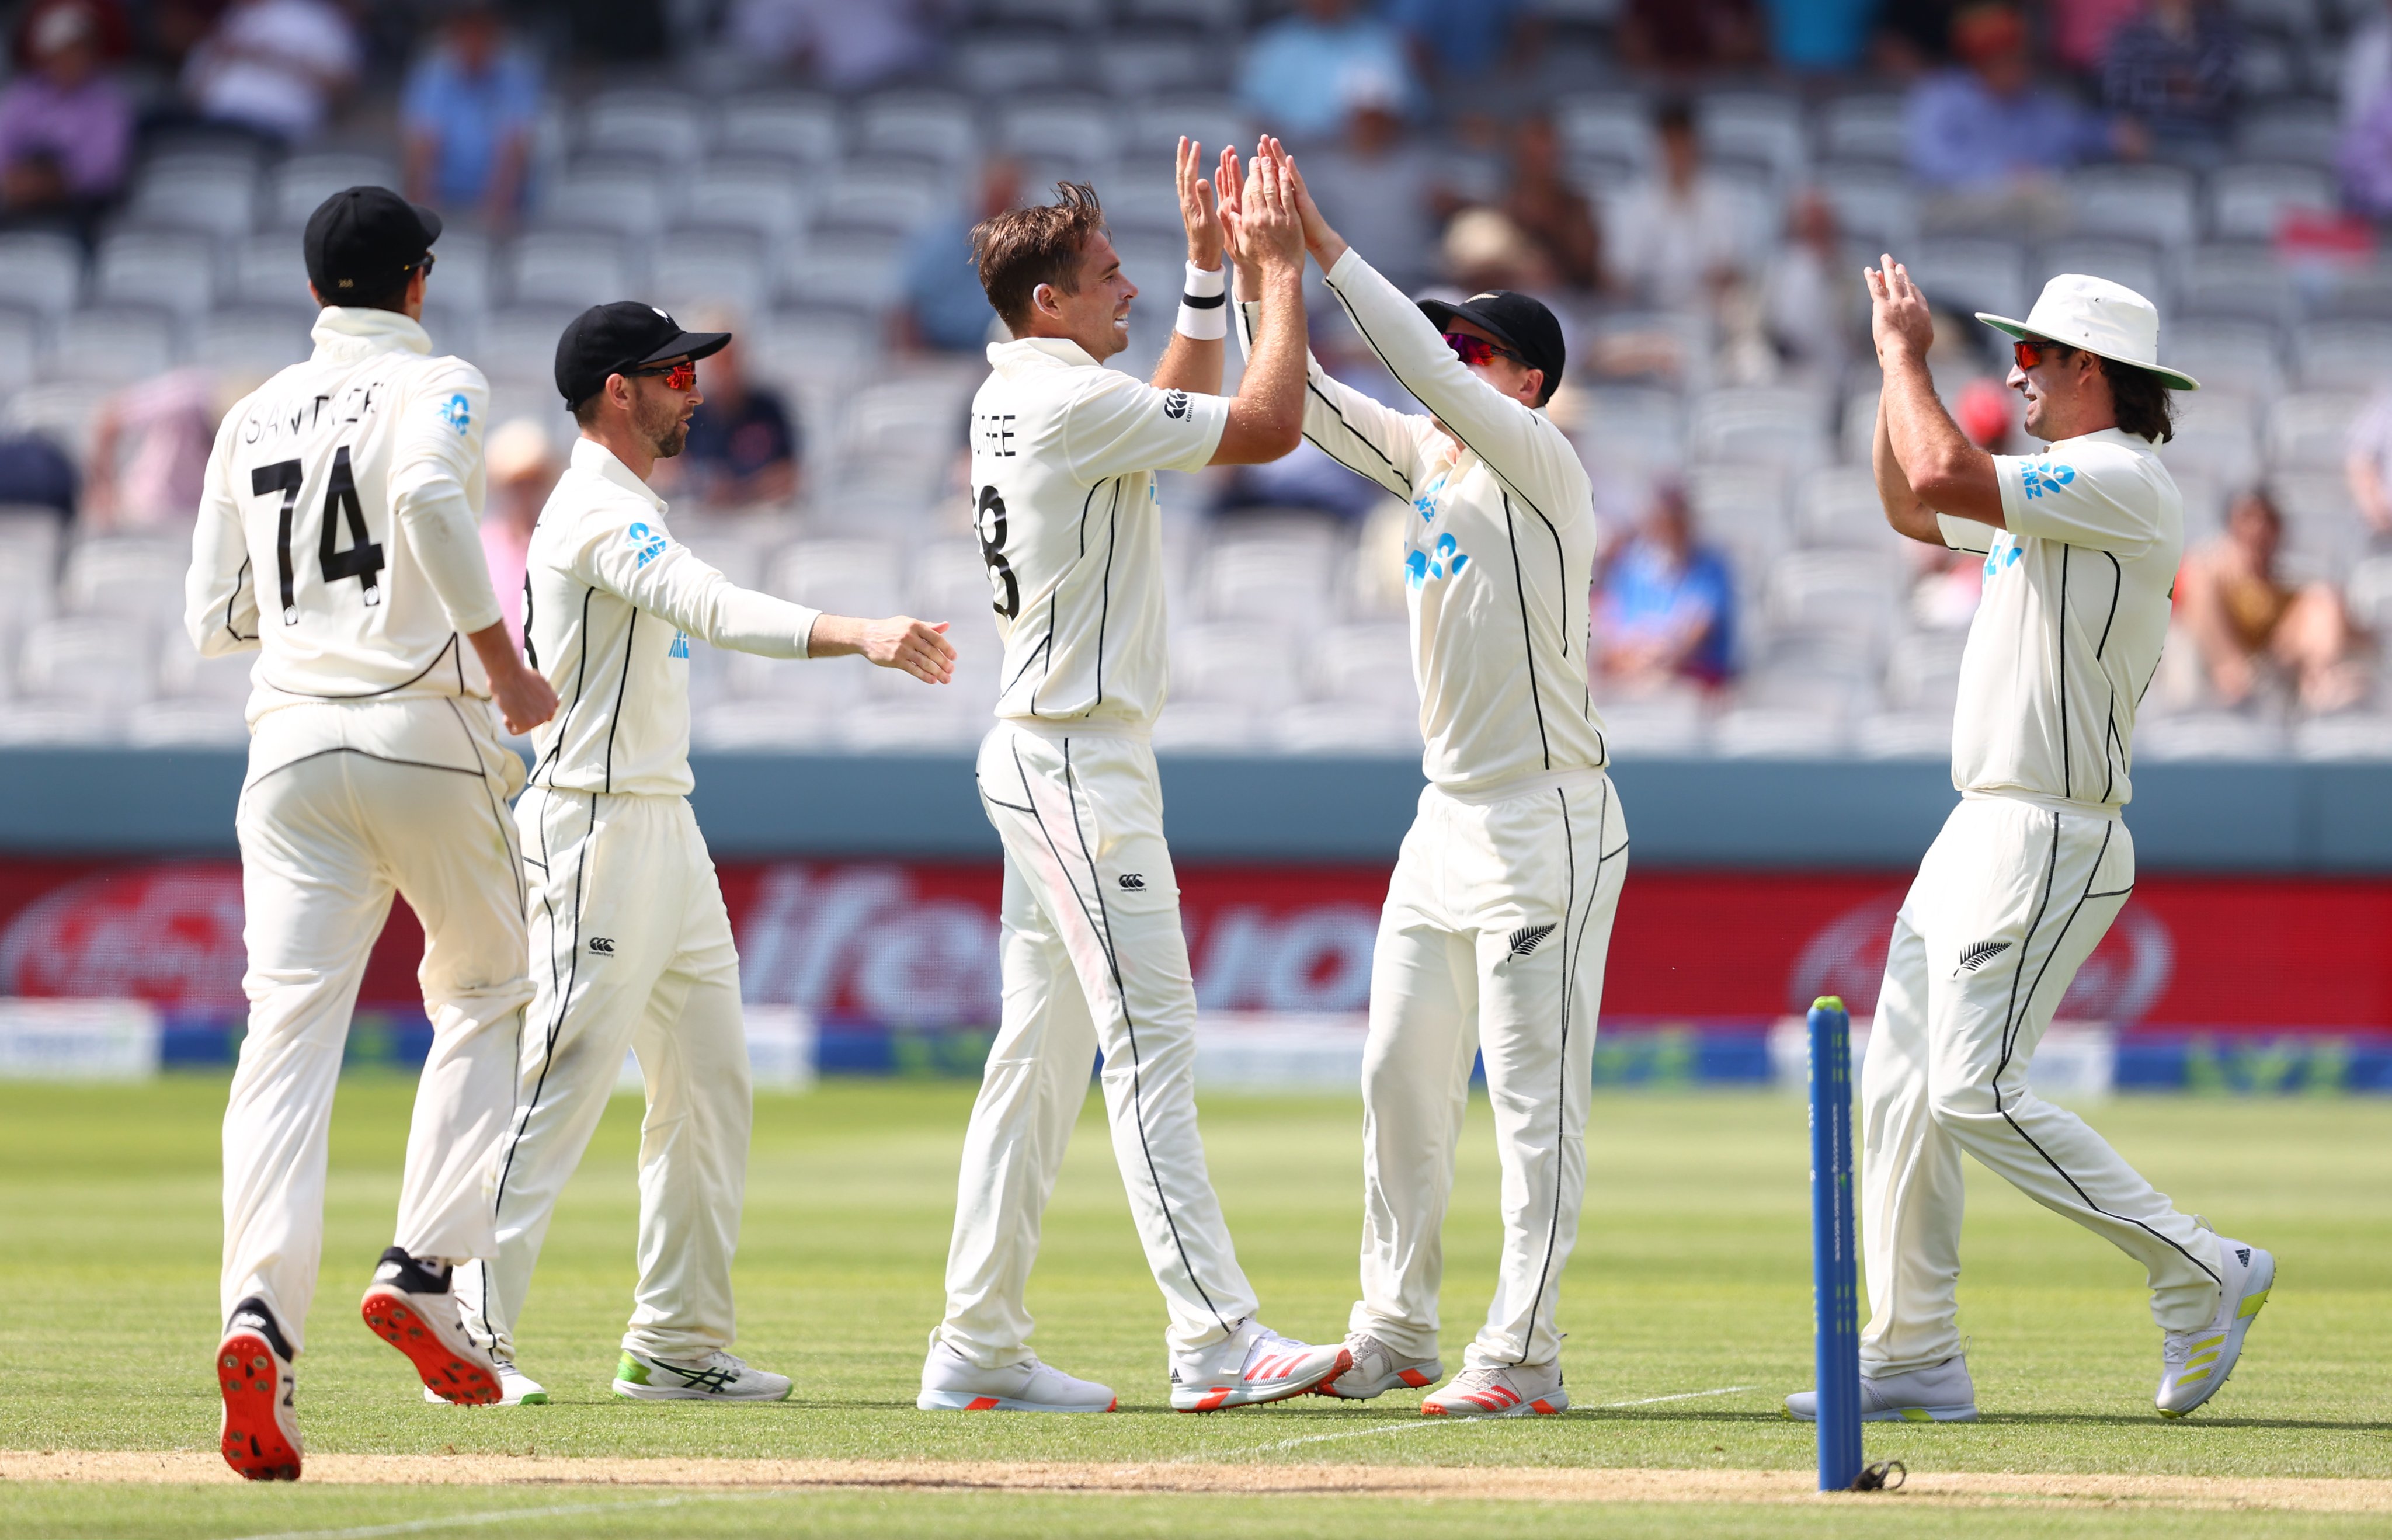 ENG vs NZ | Lord’s Day 4 Talking Points: Tim Southee’s accuracy and Ollie Pope’s backfiring shuffle